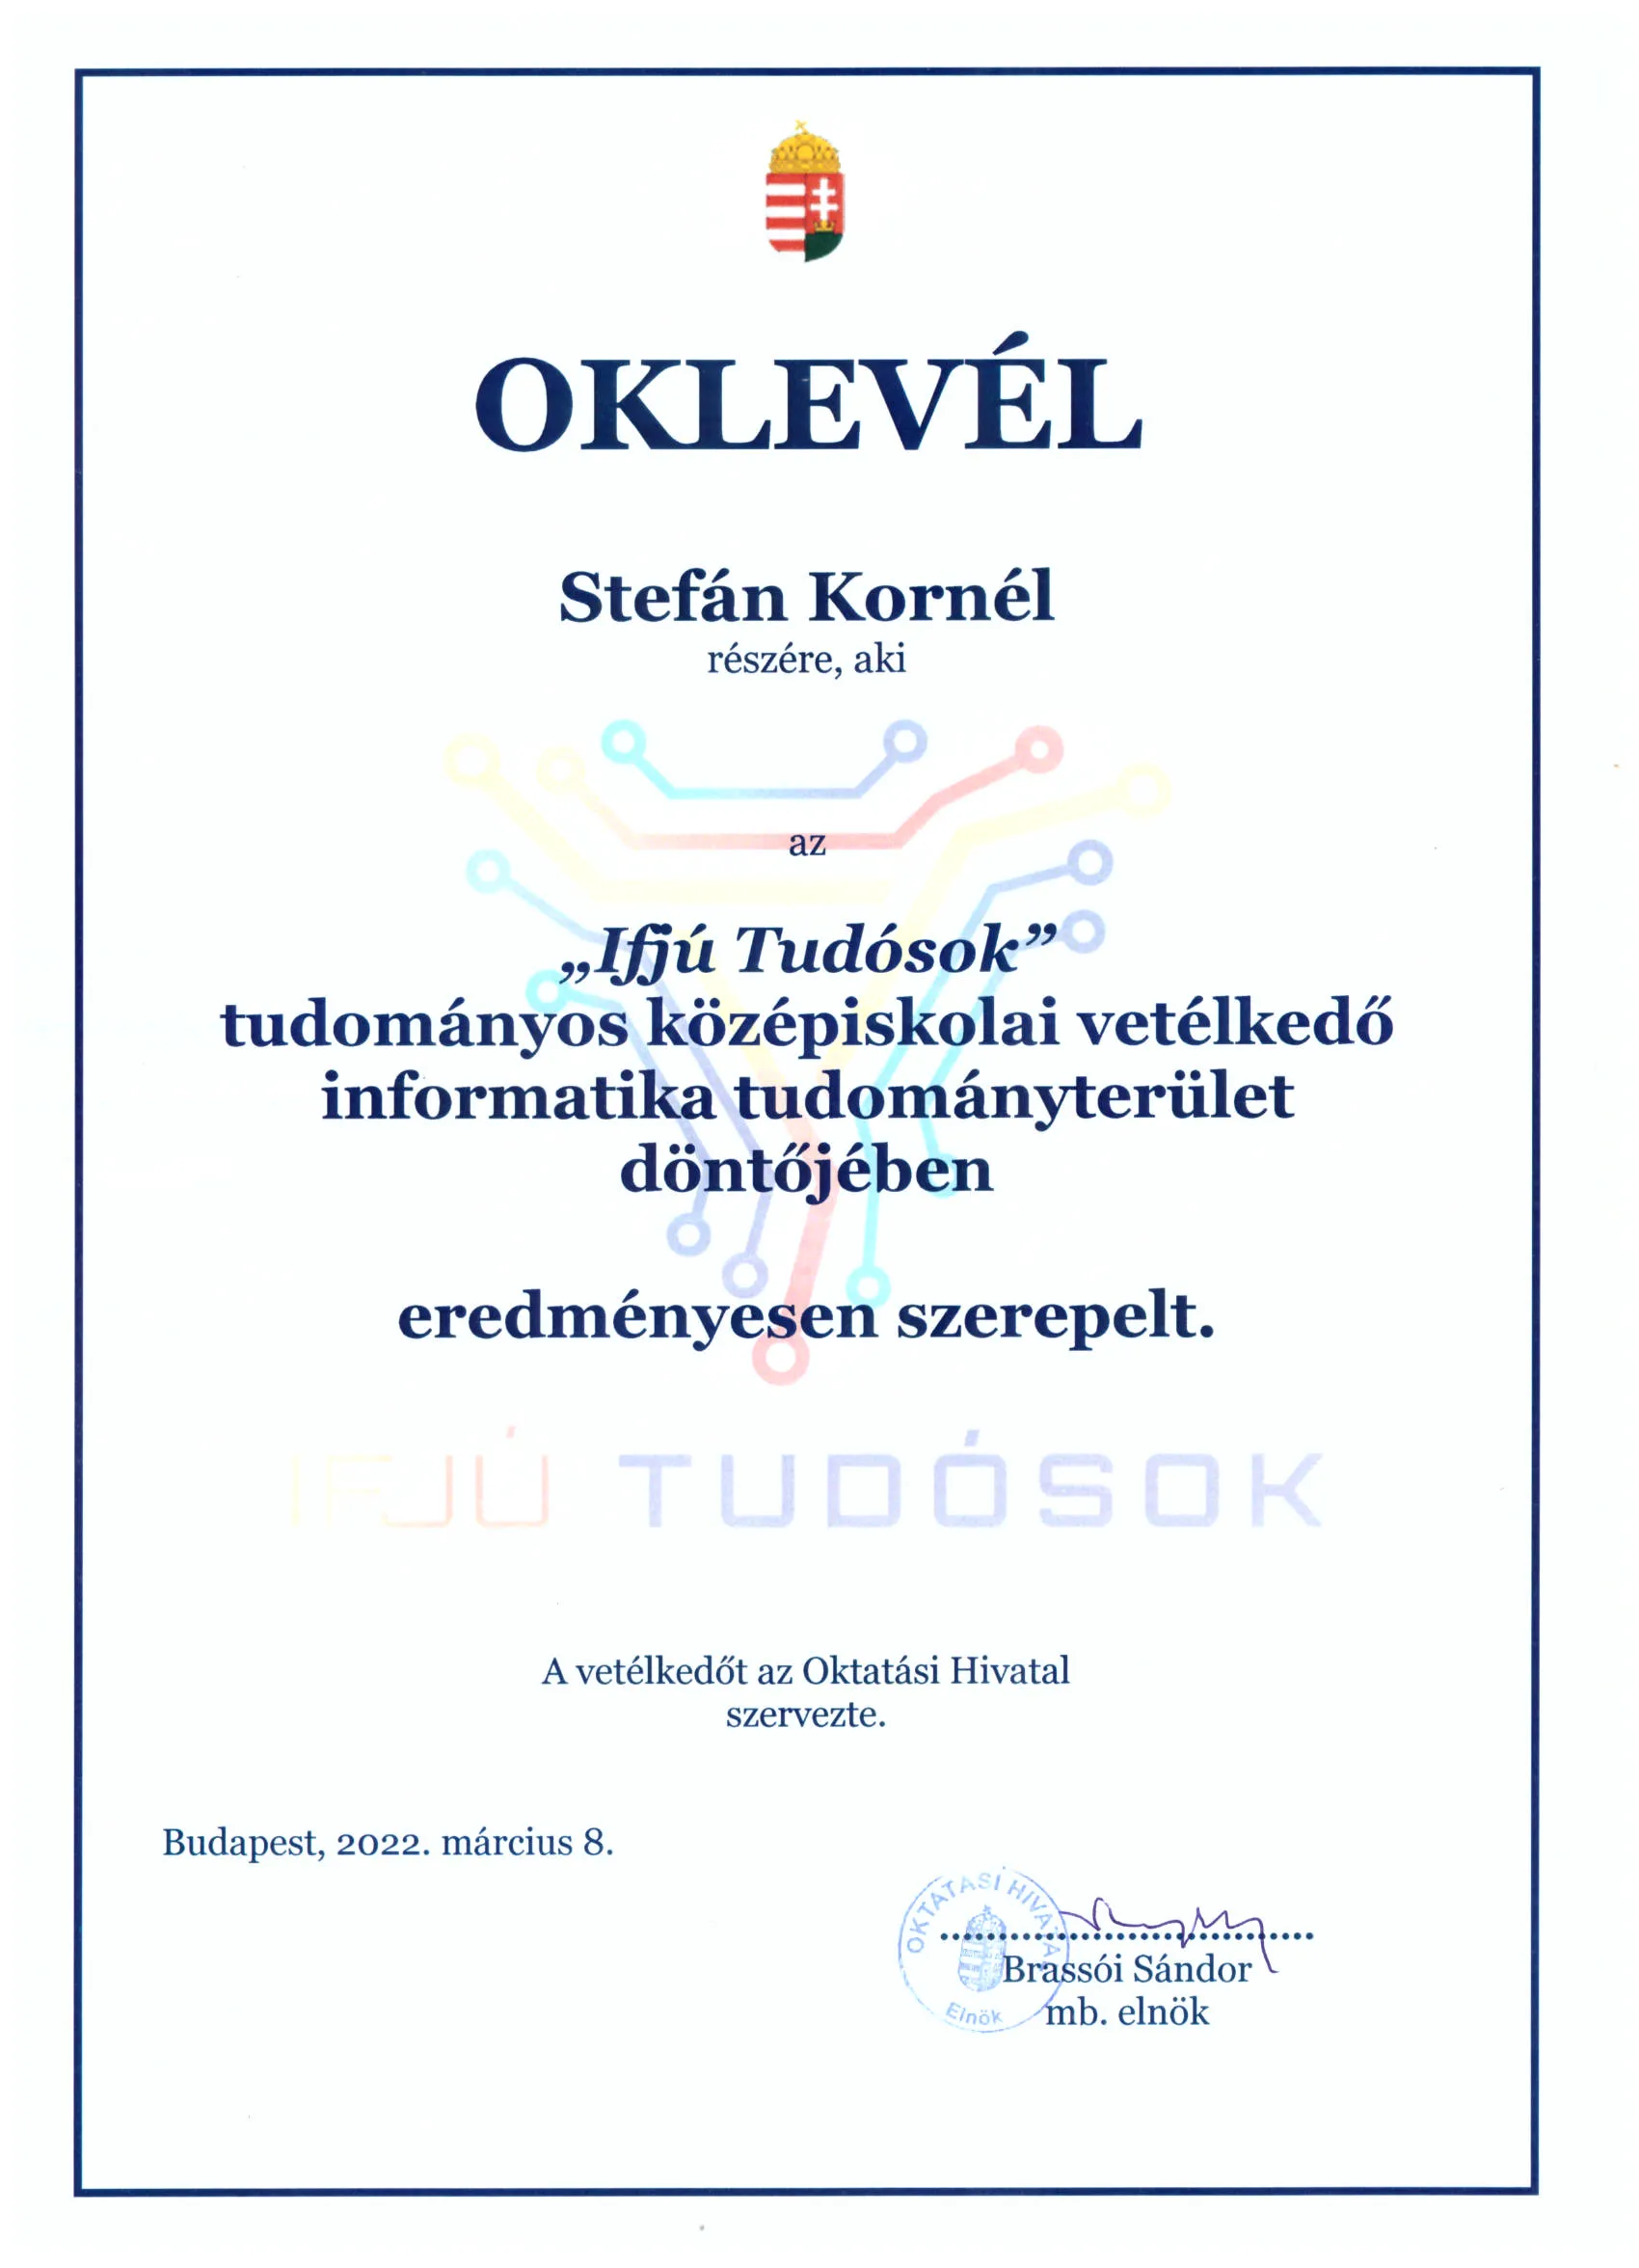 Competition certificate